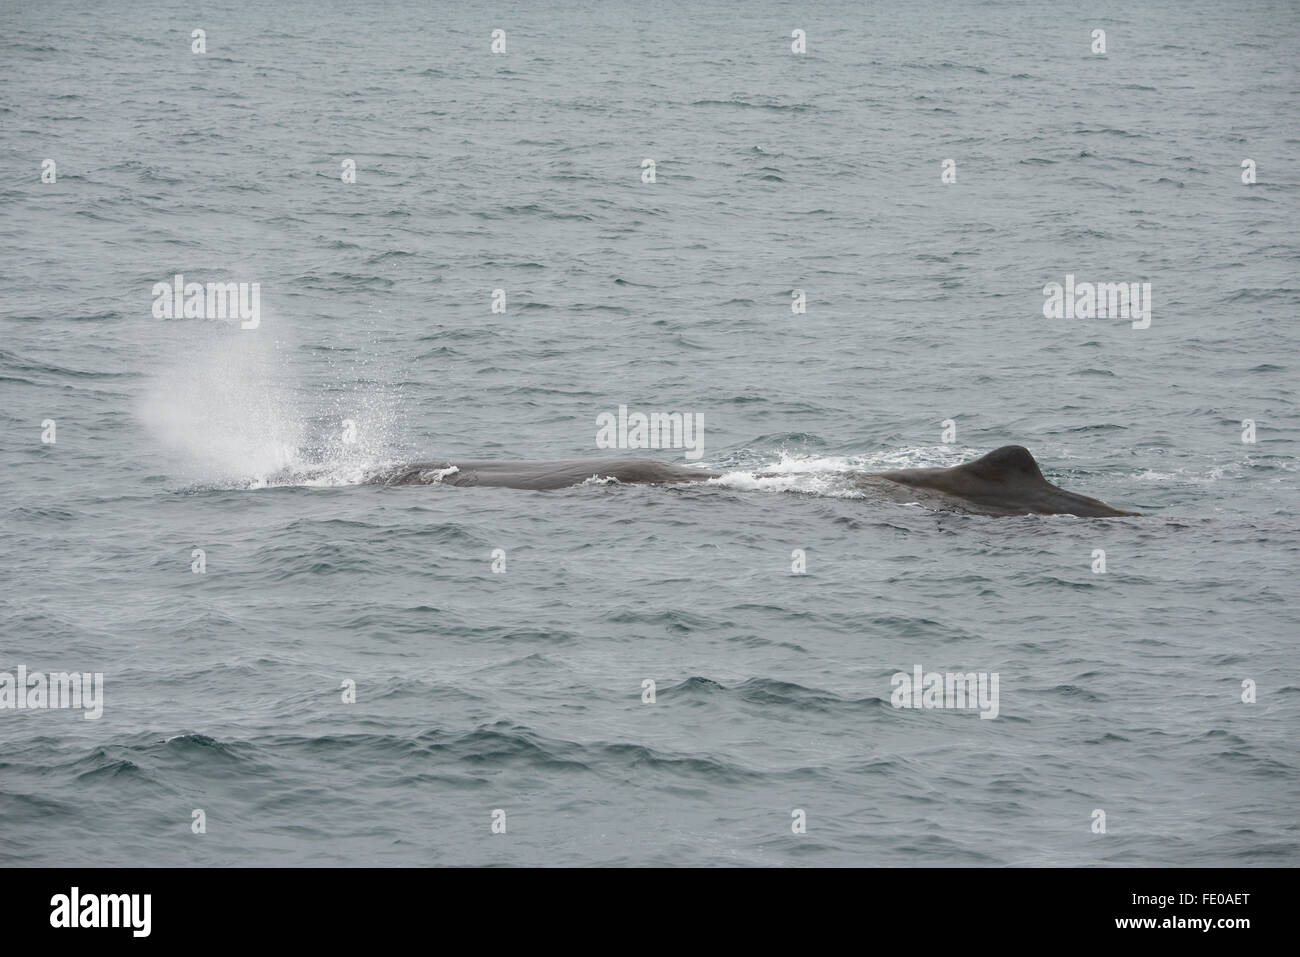 New Zealand, South Island, Kaikoura. Male Sperm whale (Physeter macrocephalus) aka cachalot, largest of the toothed whales. Stock Photo